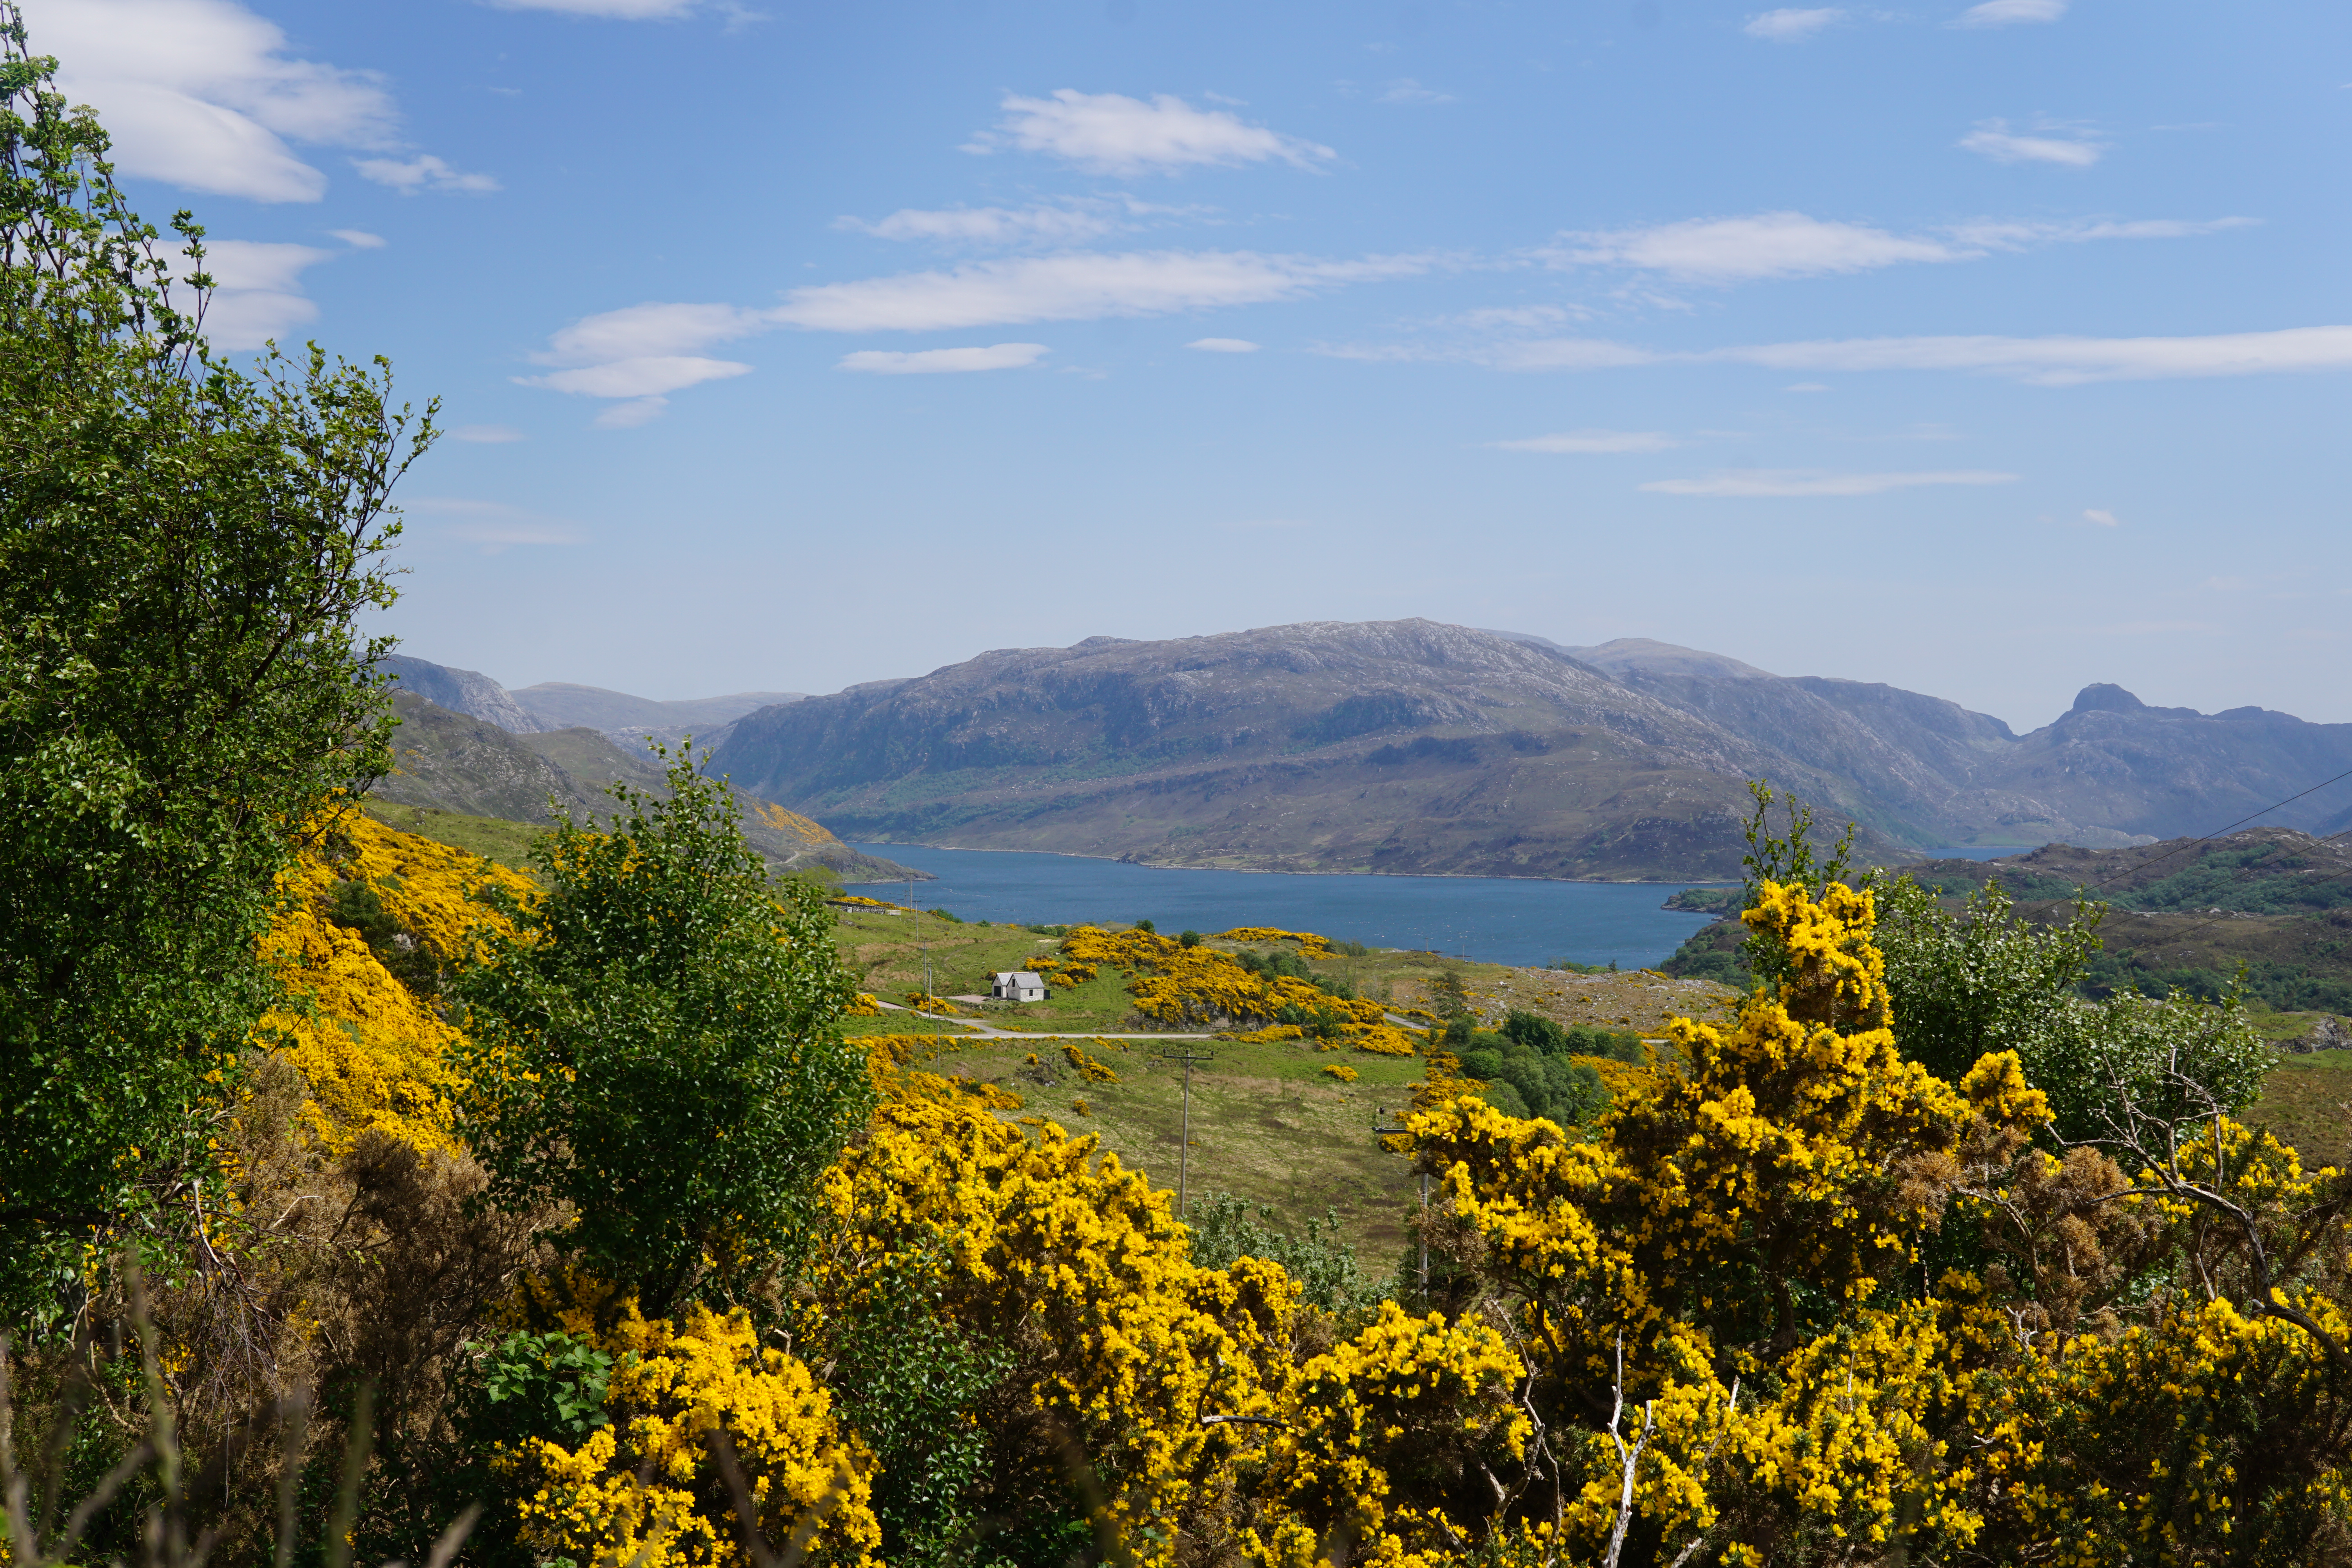 Image of the Scottish scenery seen on the NC500